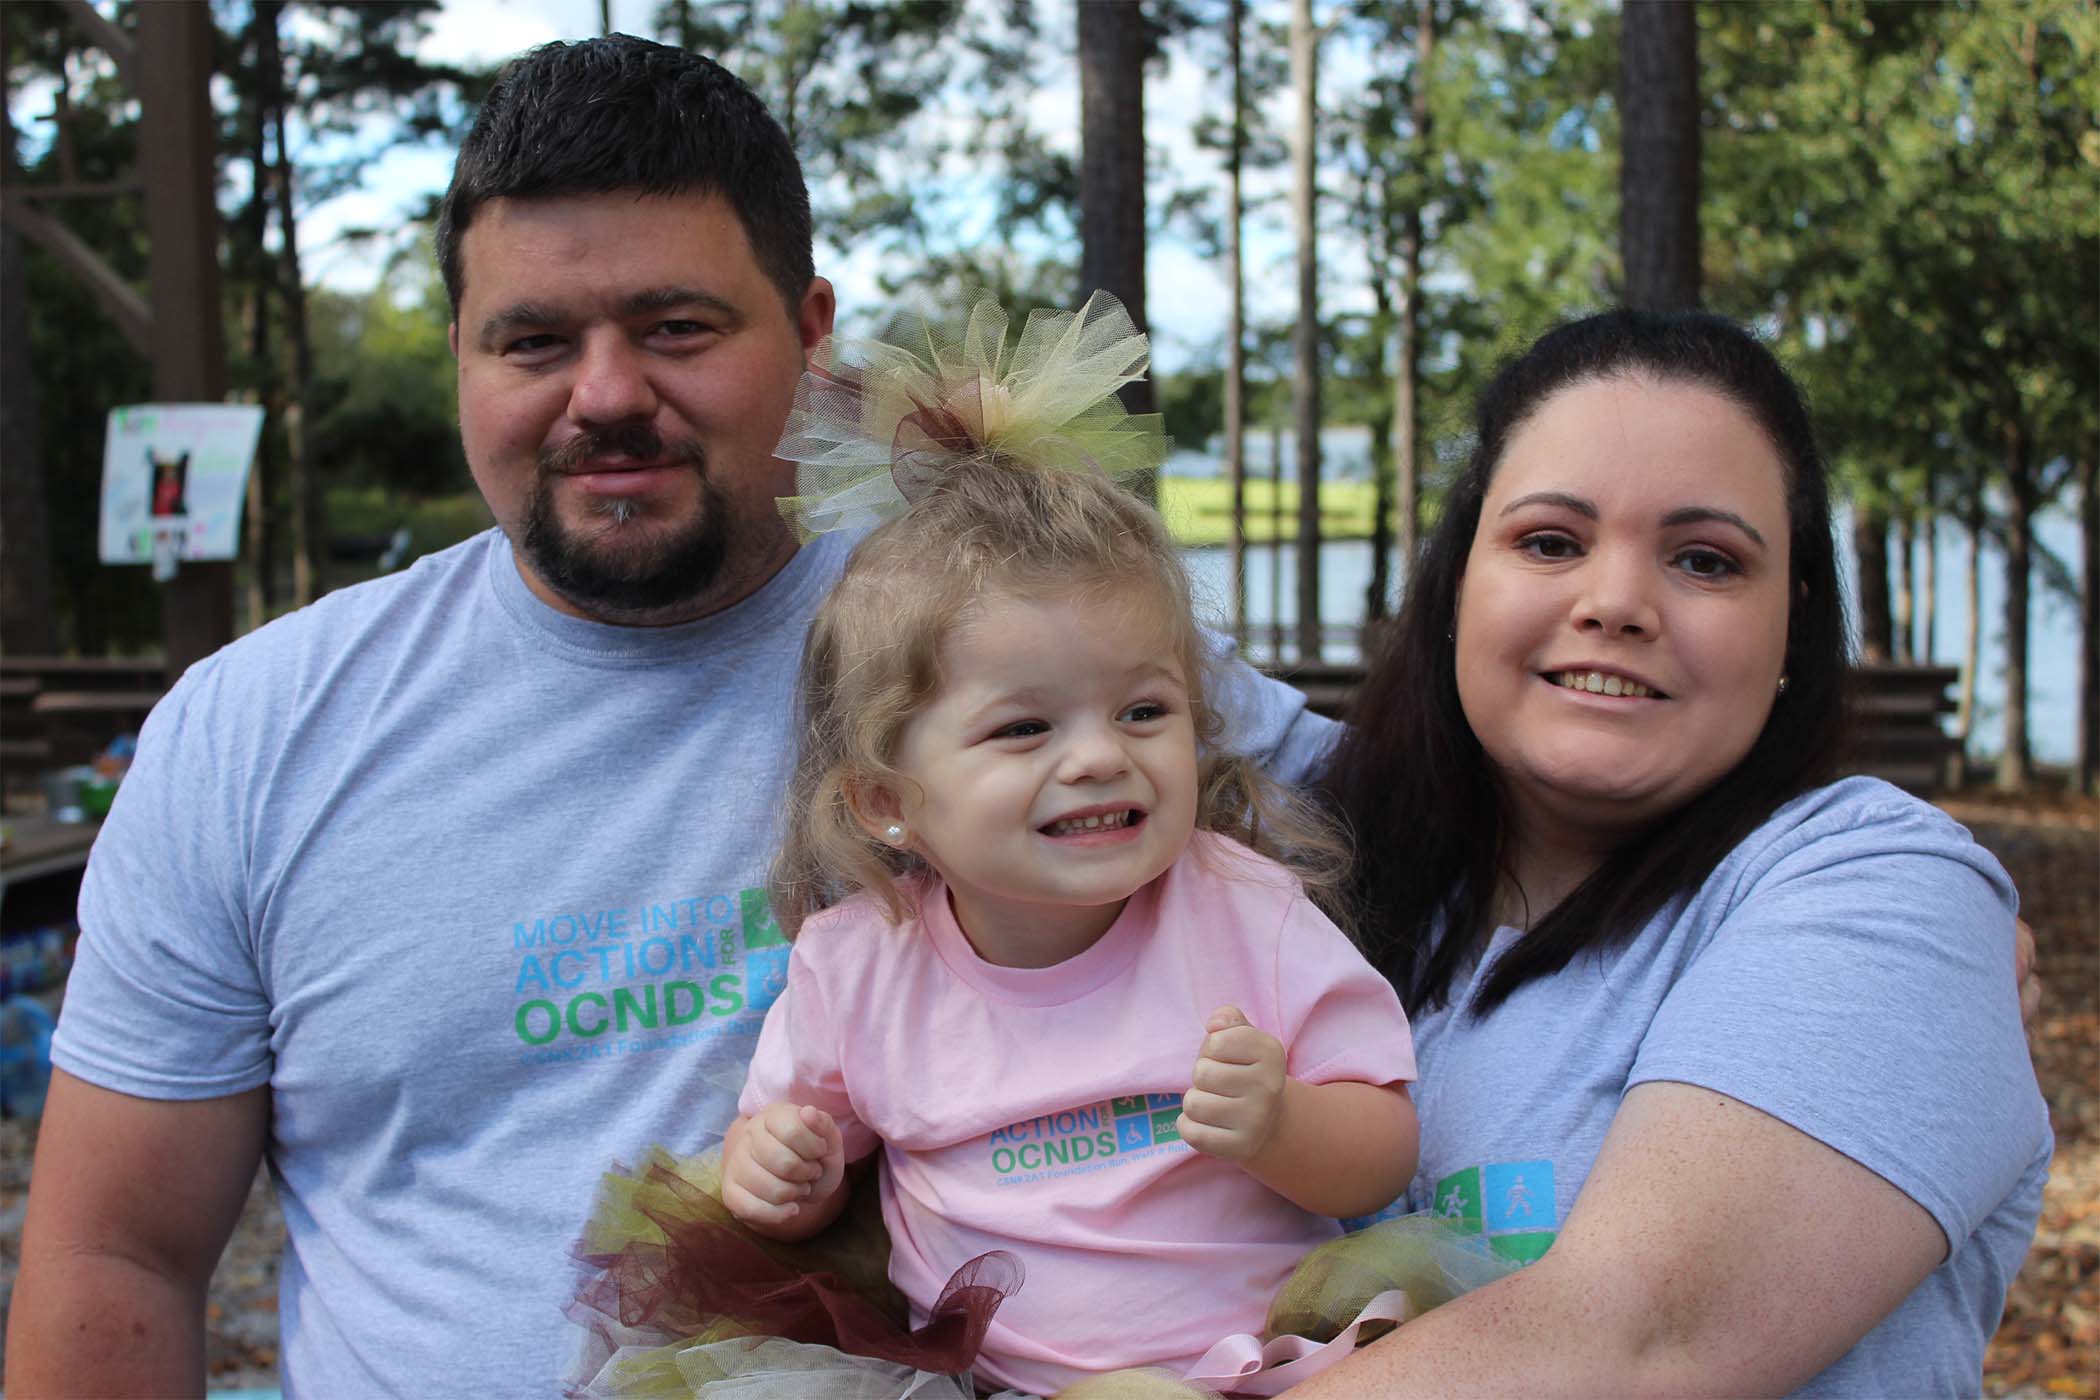 Adelynn's Army moves into action to raise awareness for rare disease